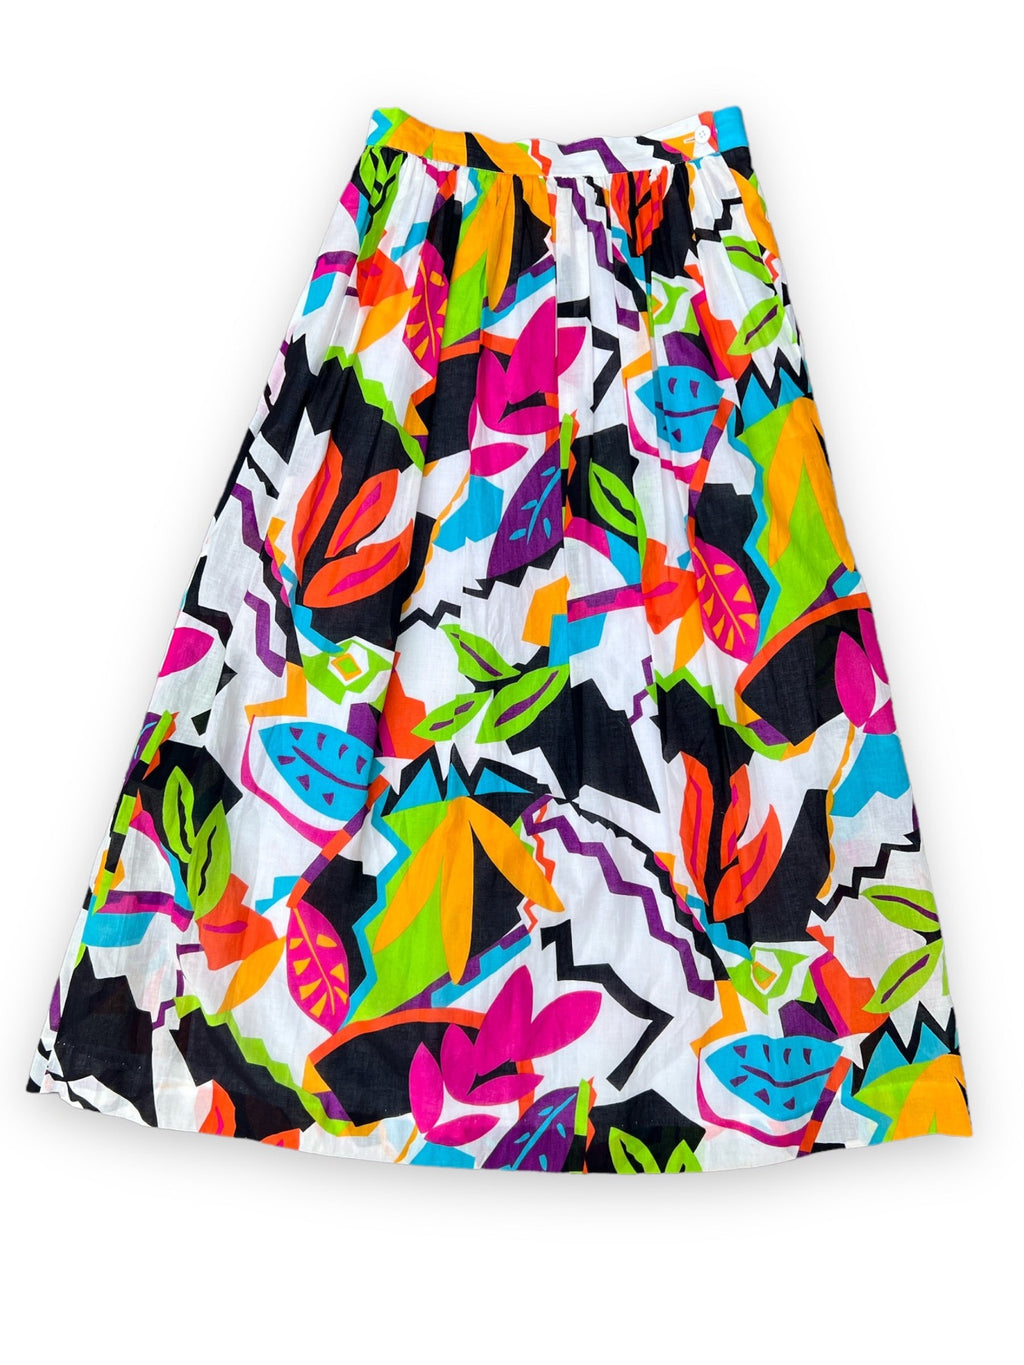 TANNER NEW WAVE FLORAL SKIRT